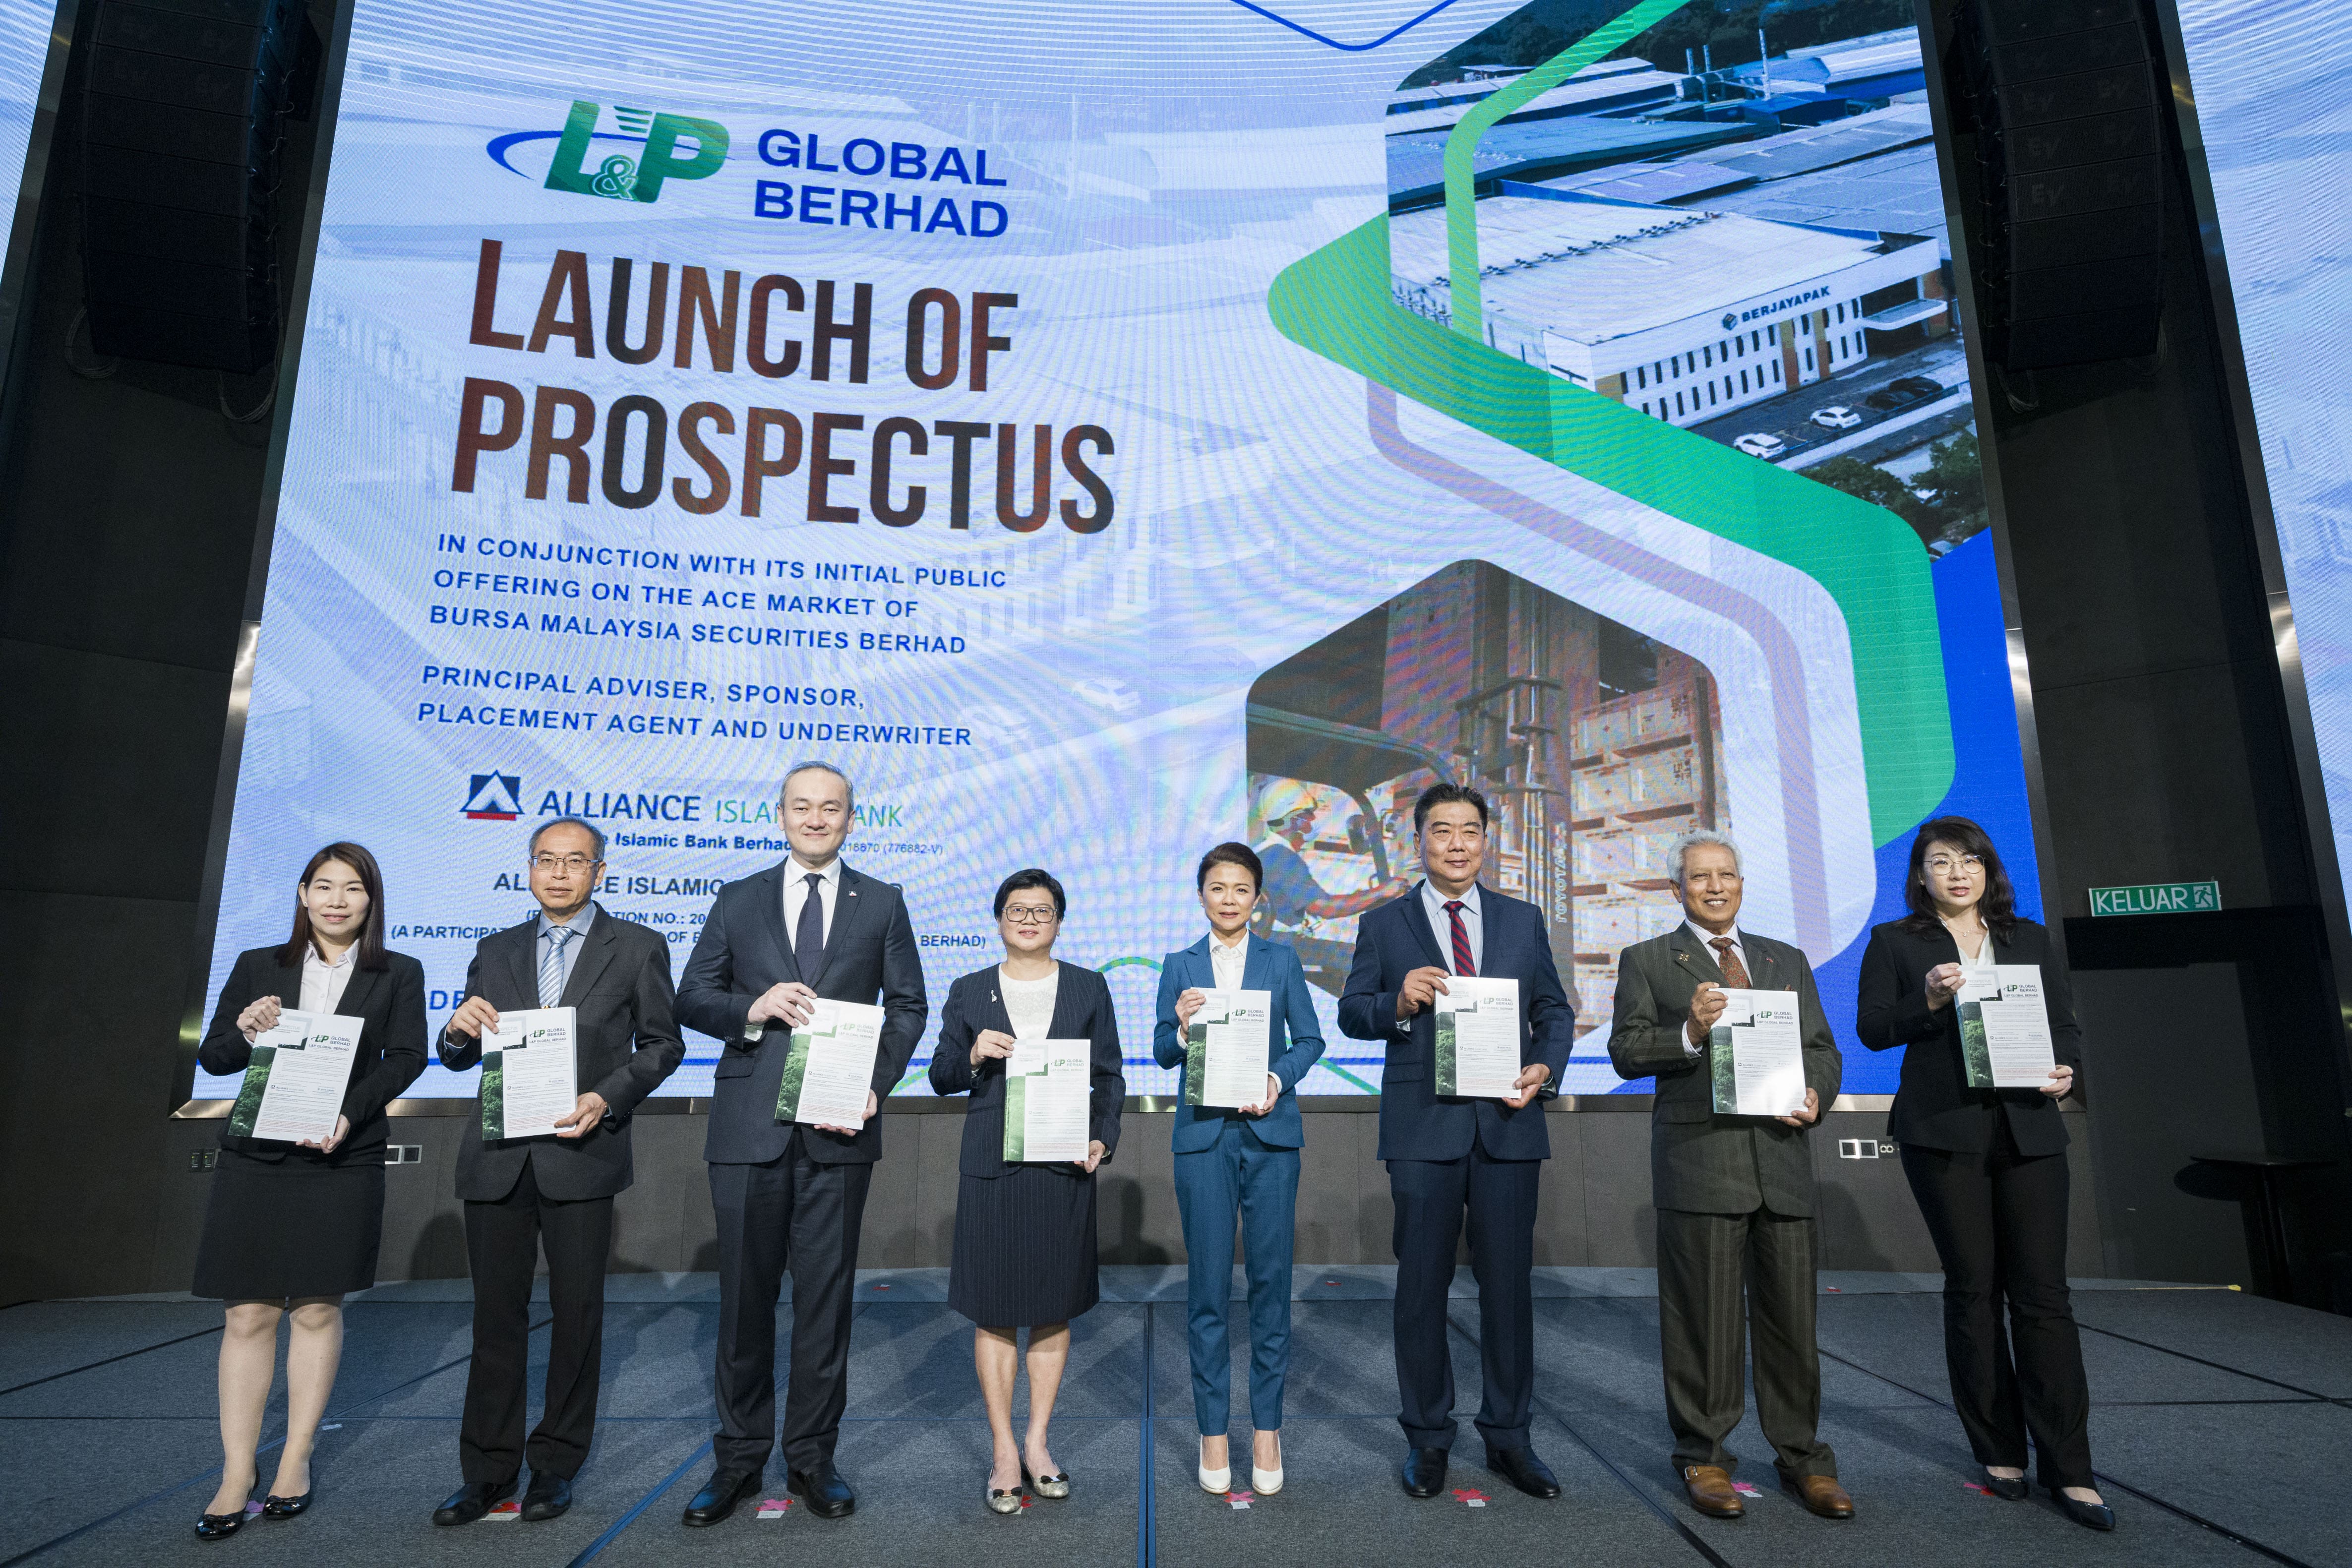 (From left) L&P Global Bhd independent non-executive directors Phoon Yee Min and Datuk Seri Lee Kah Choon, Alliance Bank Malaysia Bhd group chief executive officer Kellee Kam Chee Khiong, L&P Global non-independent non-executive chairperson Ooi Hooi Kiang, executive director cum CEO Ooi Lay Pheng, executive director cum chief operating officer Ong Kah Hong, independent non-executive director Datuk Mohamed Amin Mohd Kassim, and chief financial officer Ow Chooi Khim